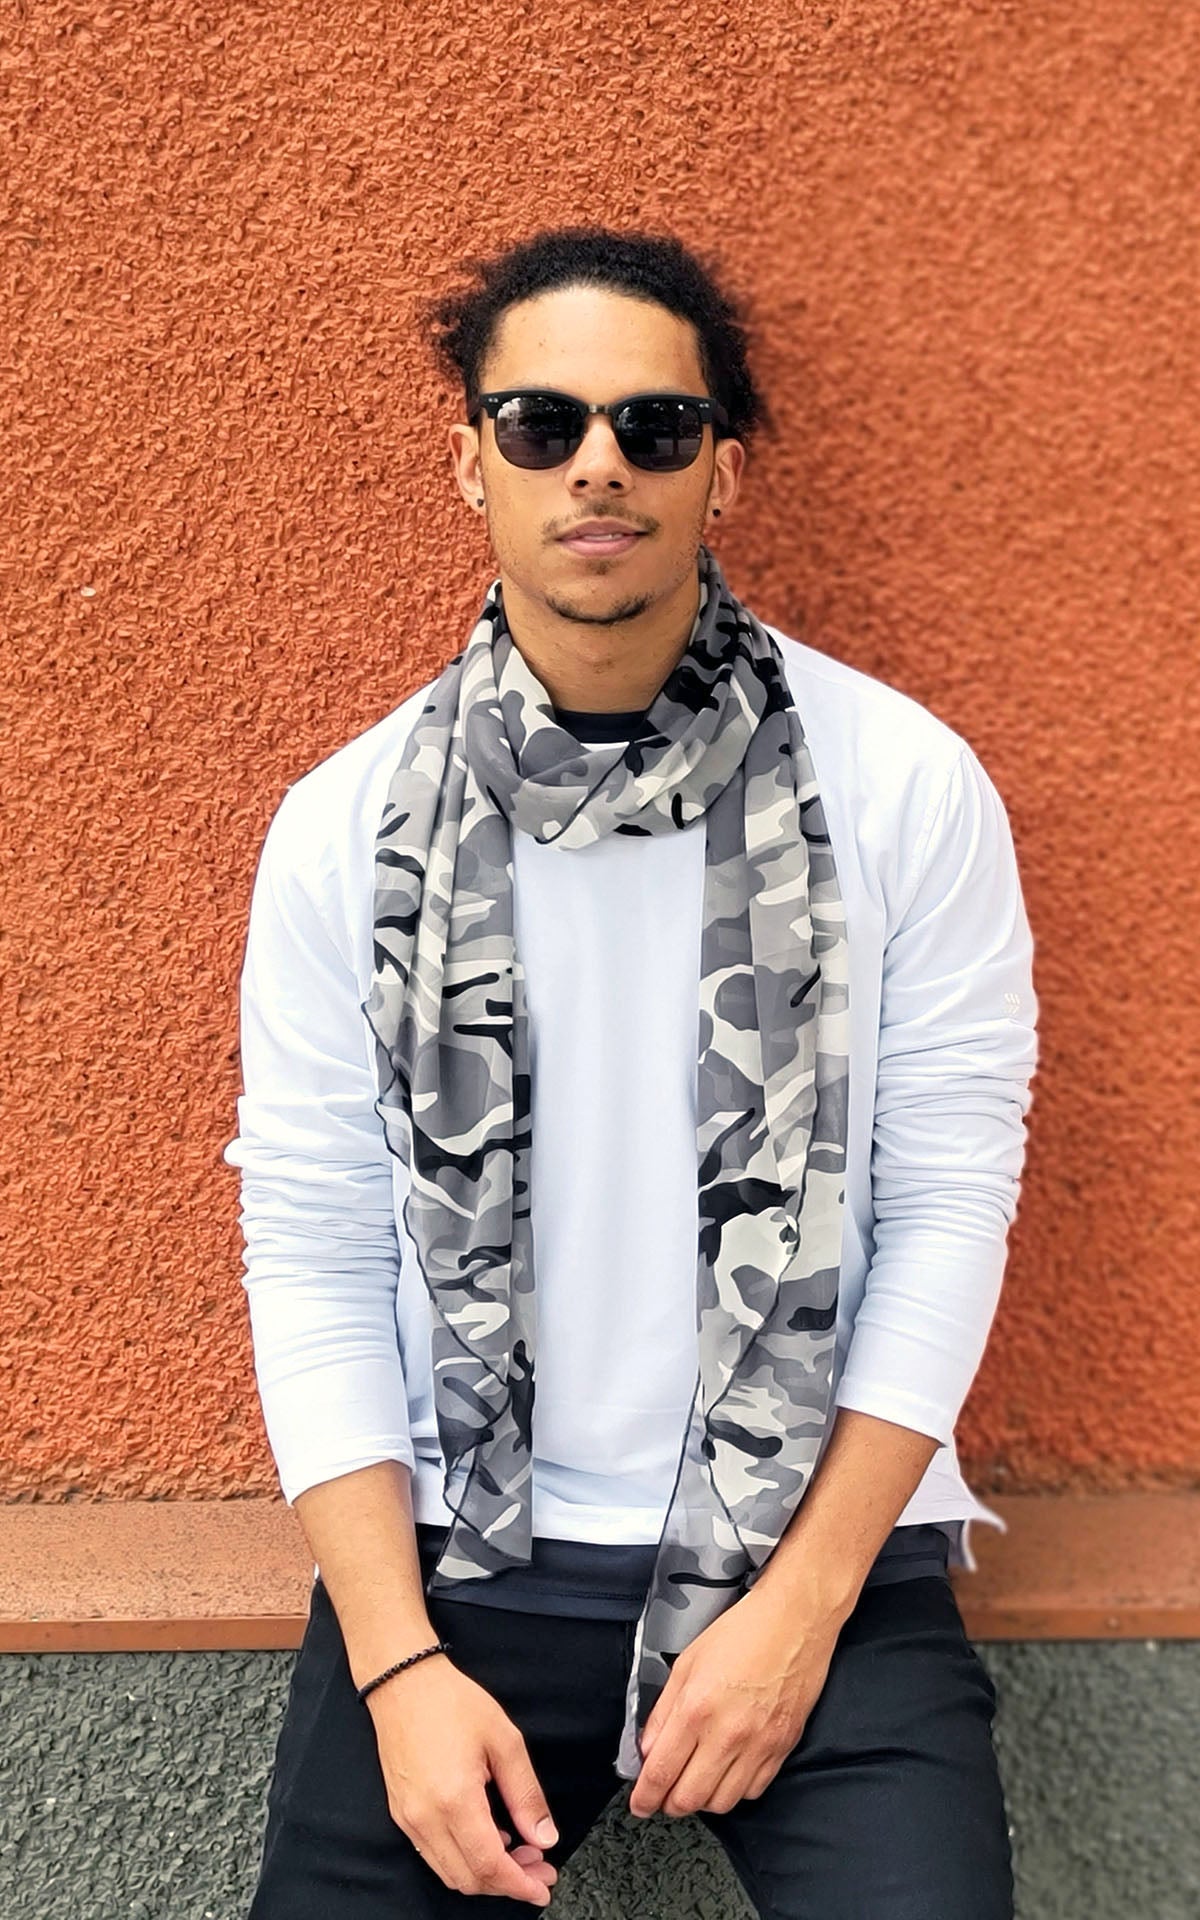 Man modeling Handkerchief Scarf in Black Ops camoflauge chiffon scarf in black, gray , and ivory with sunglasses